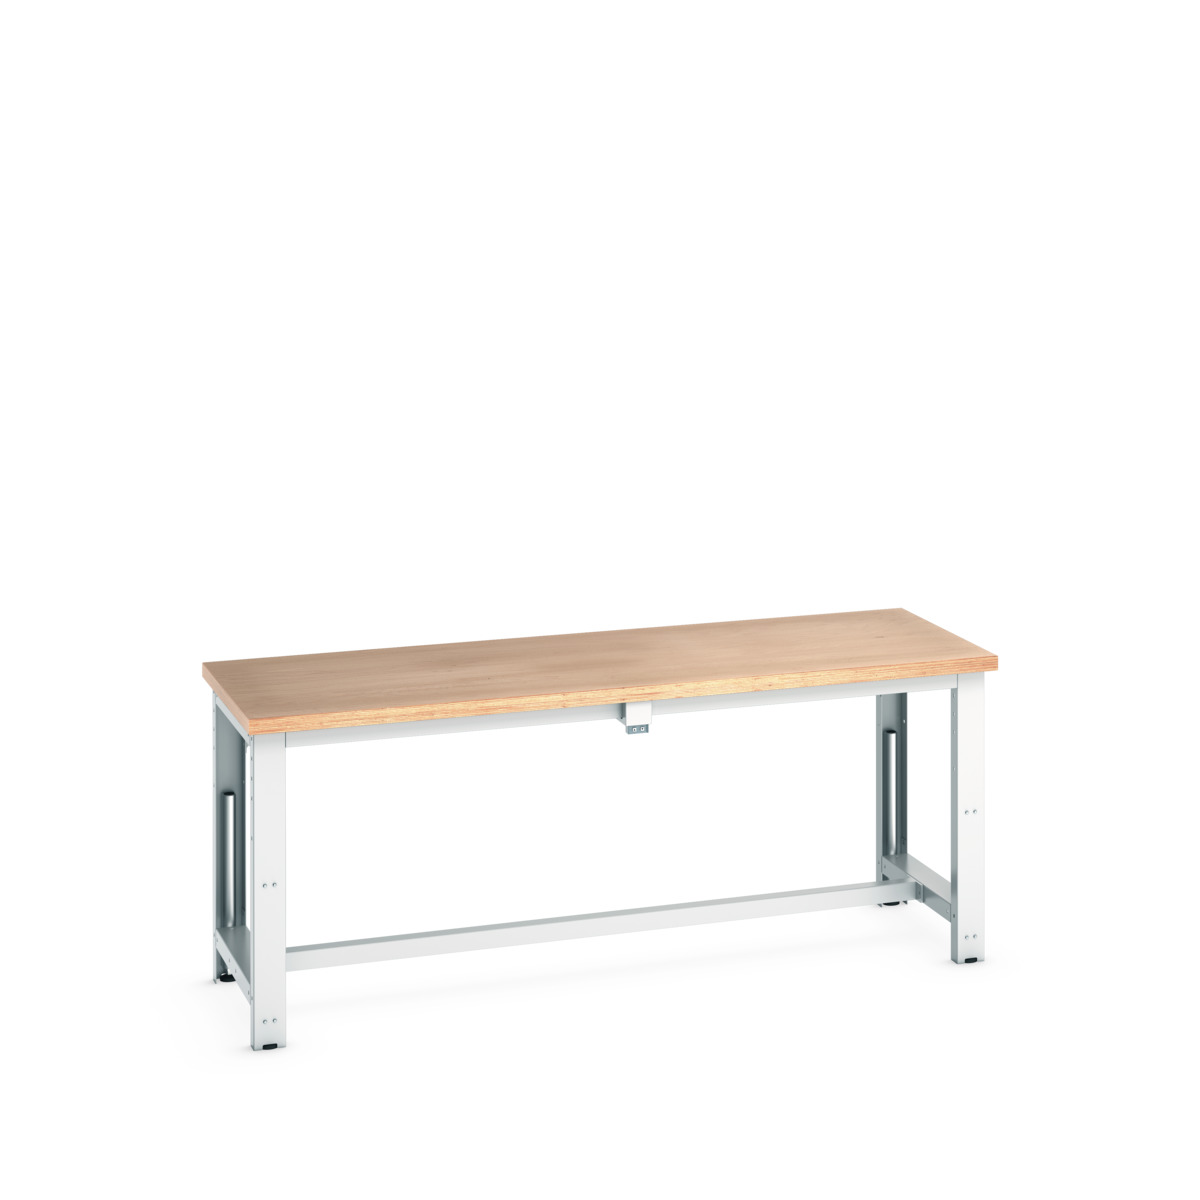 41003564. - cubio stepless adjustable height bench